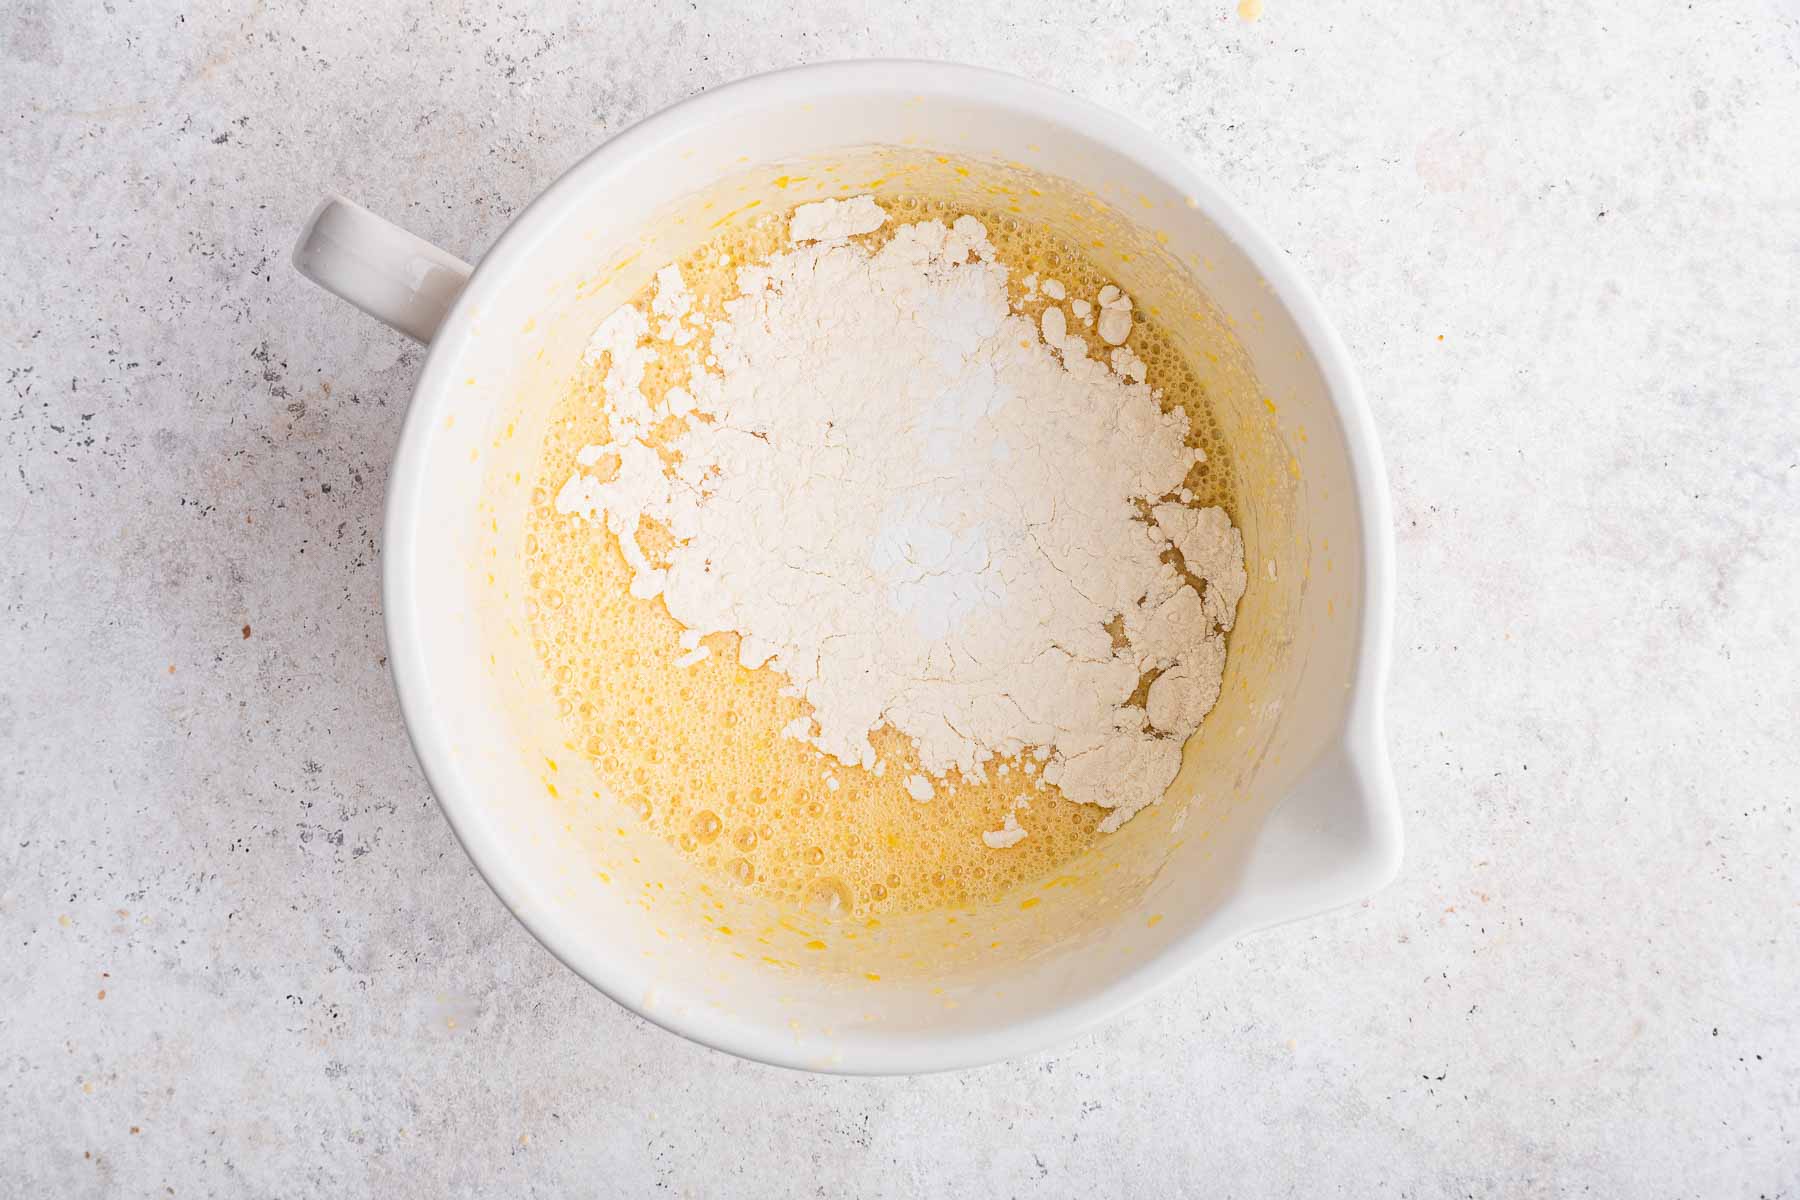 White powder on top of yellow batter in white bowl.